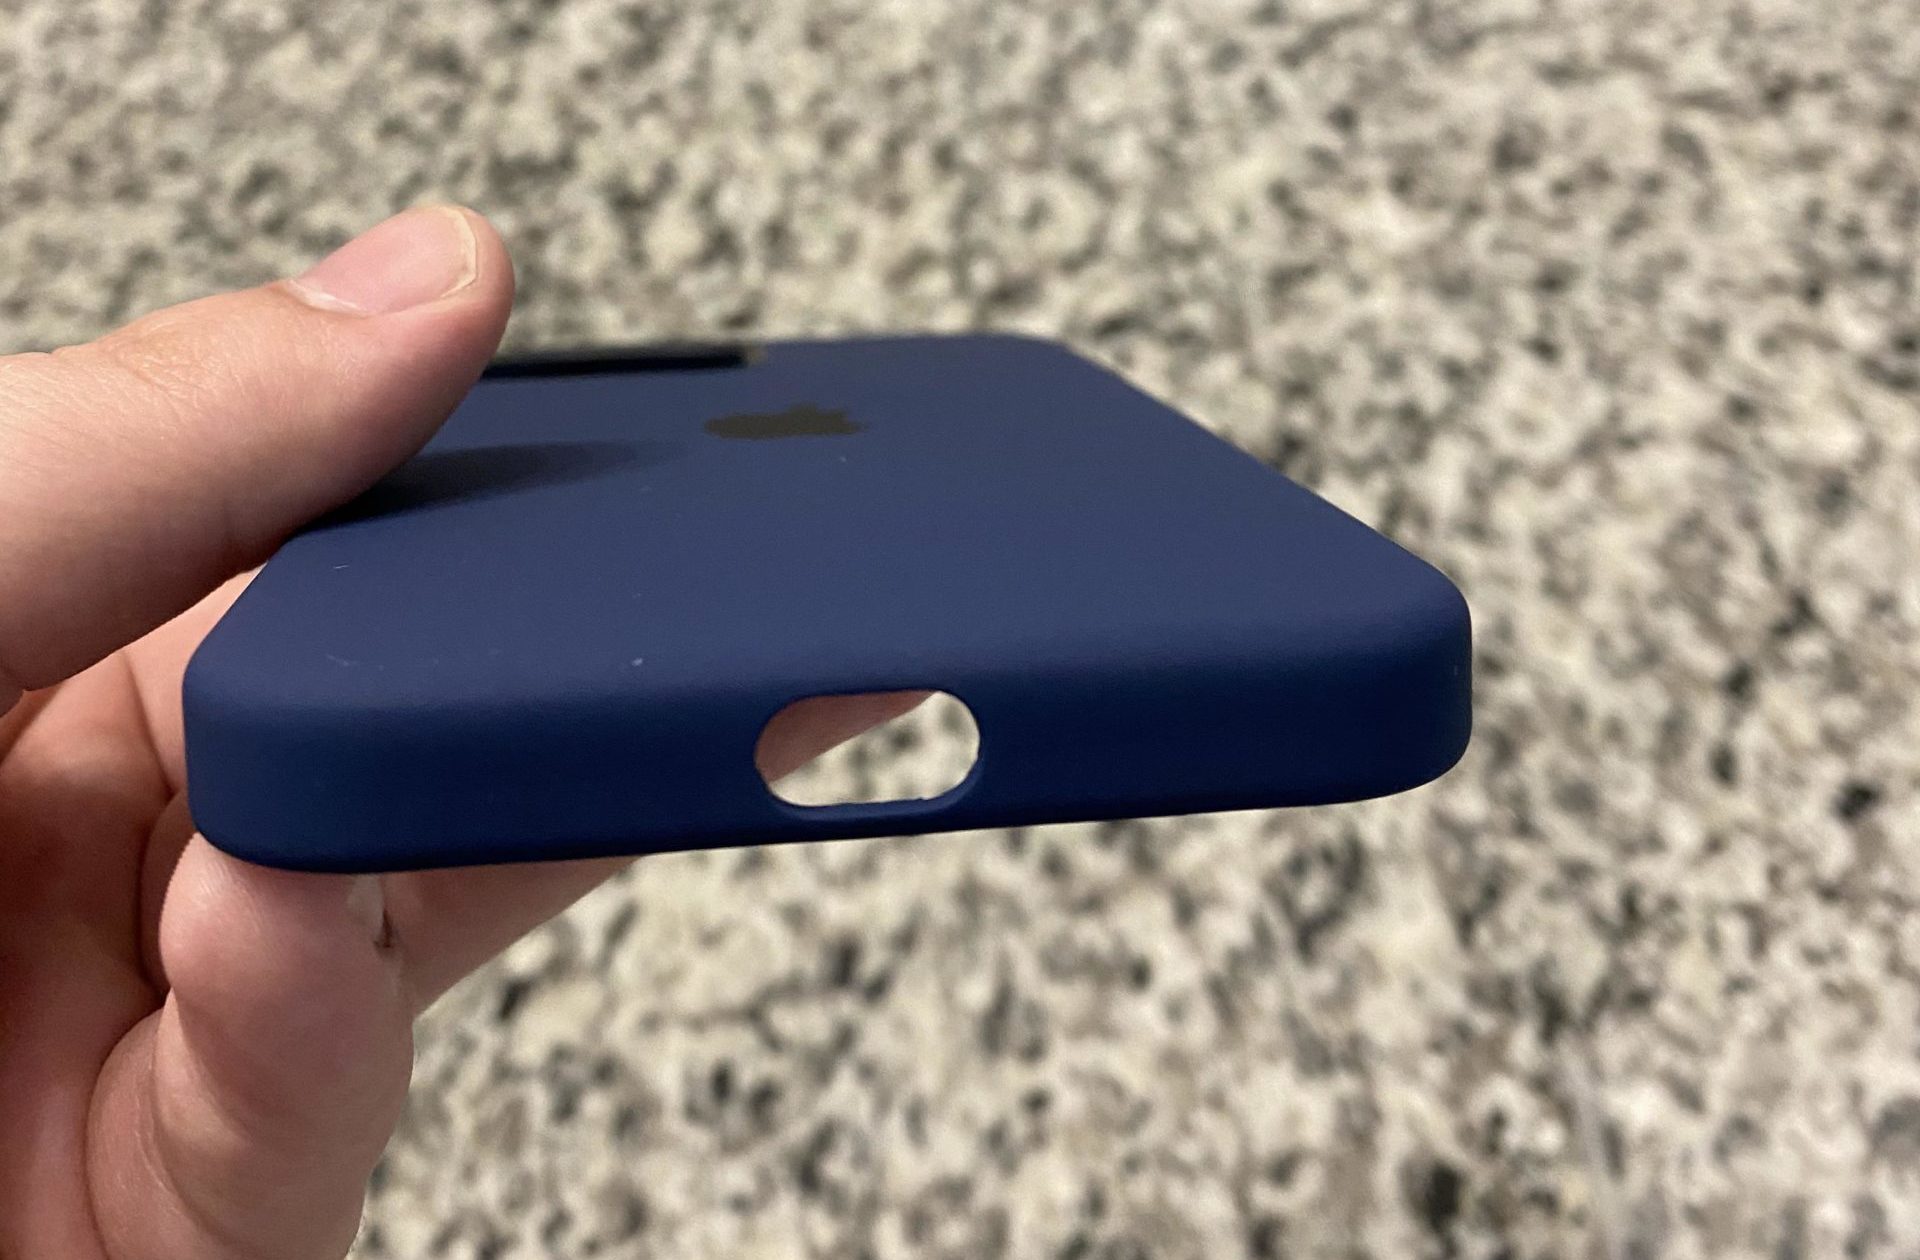 camera not focusing on iPhone 12 pro max